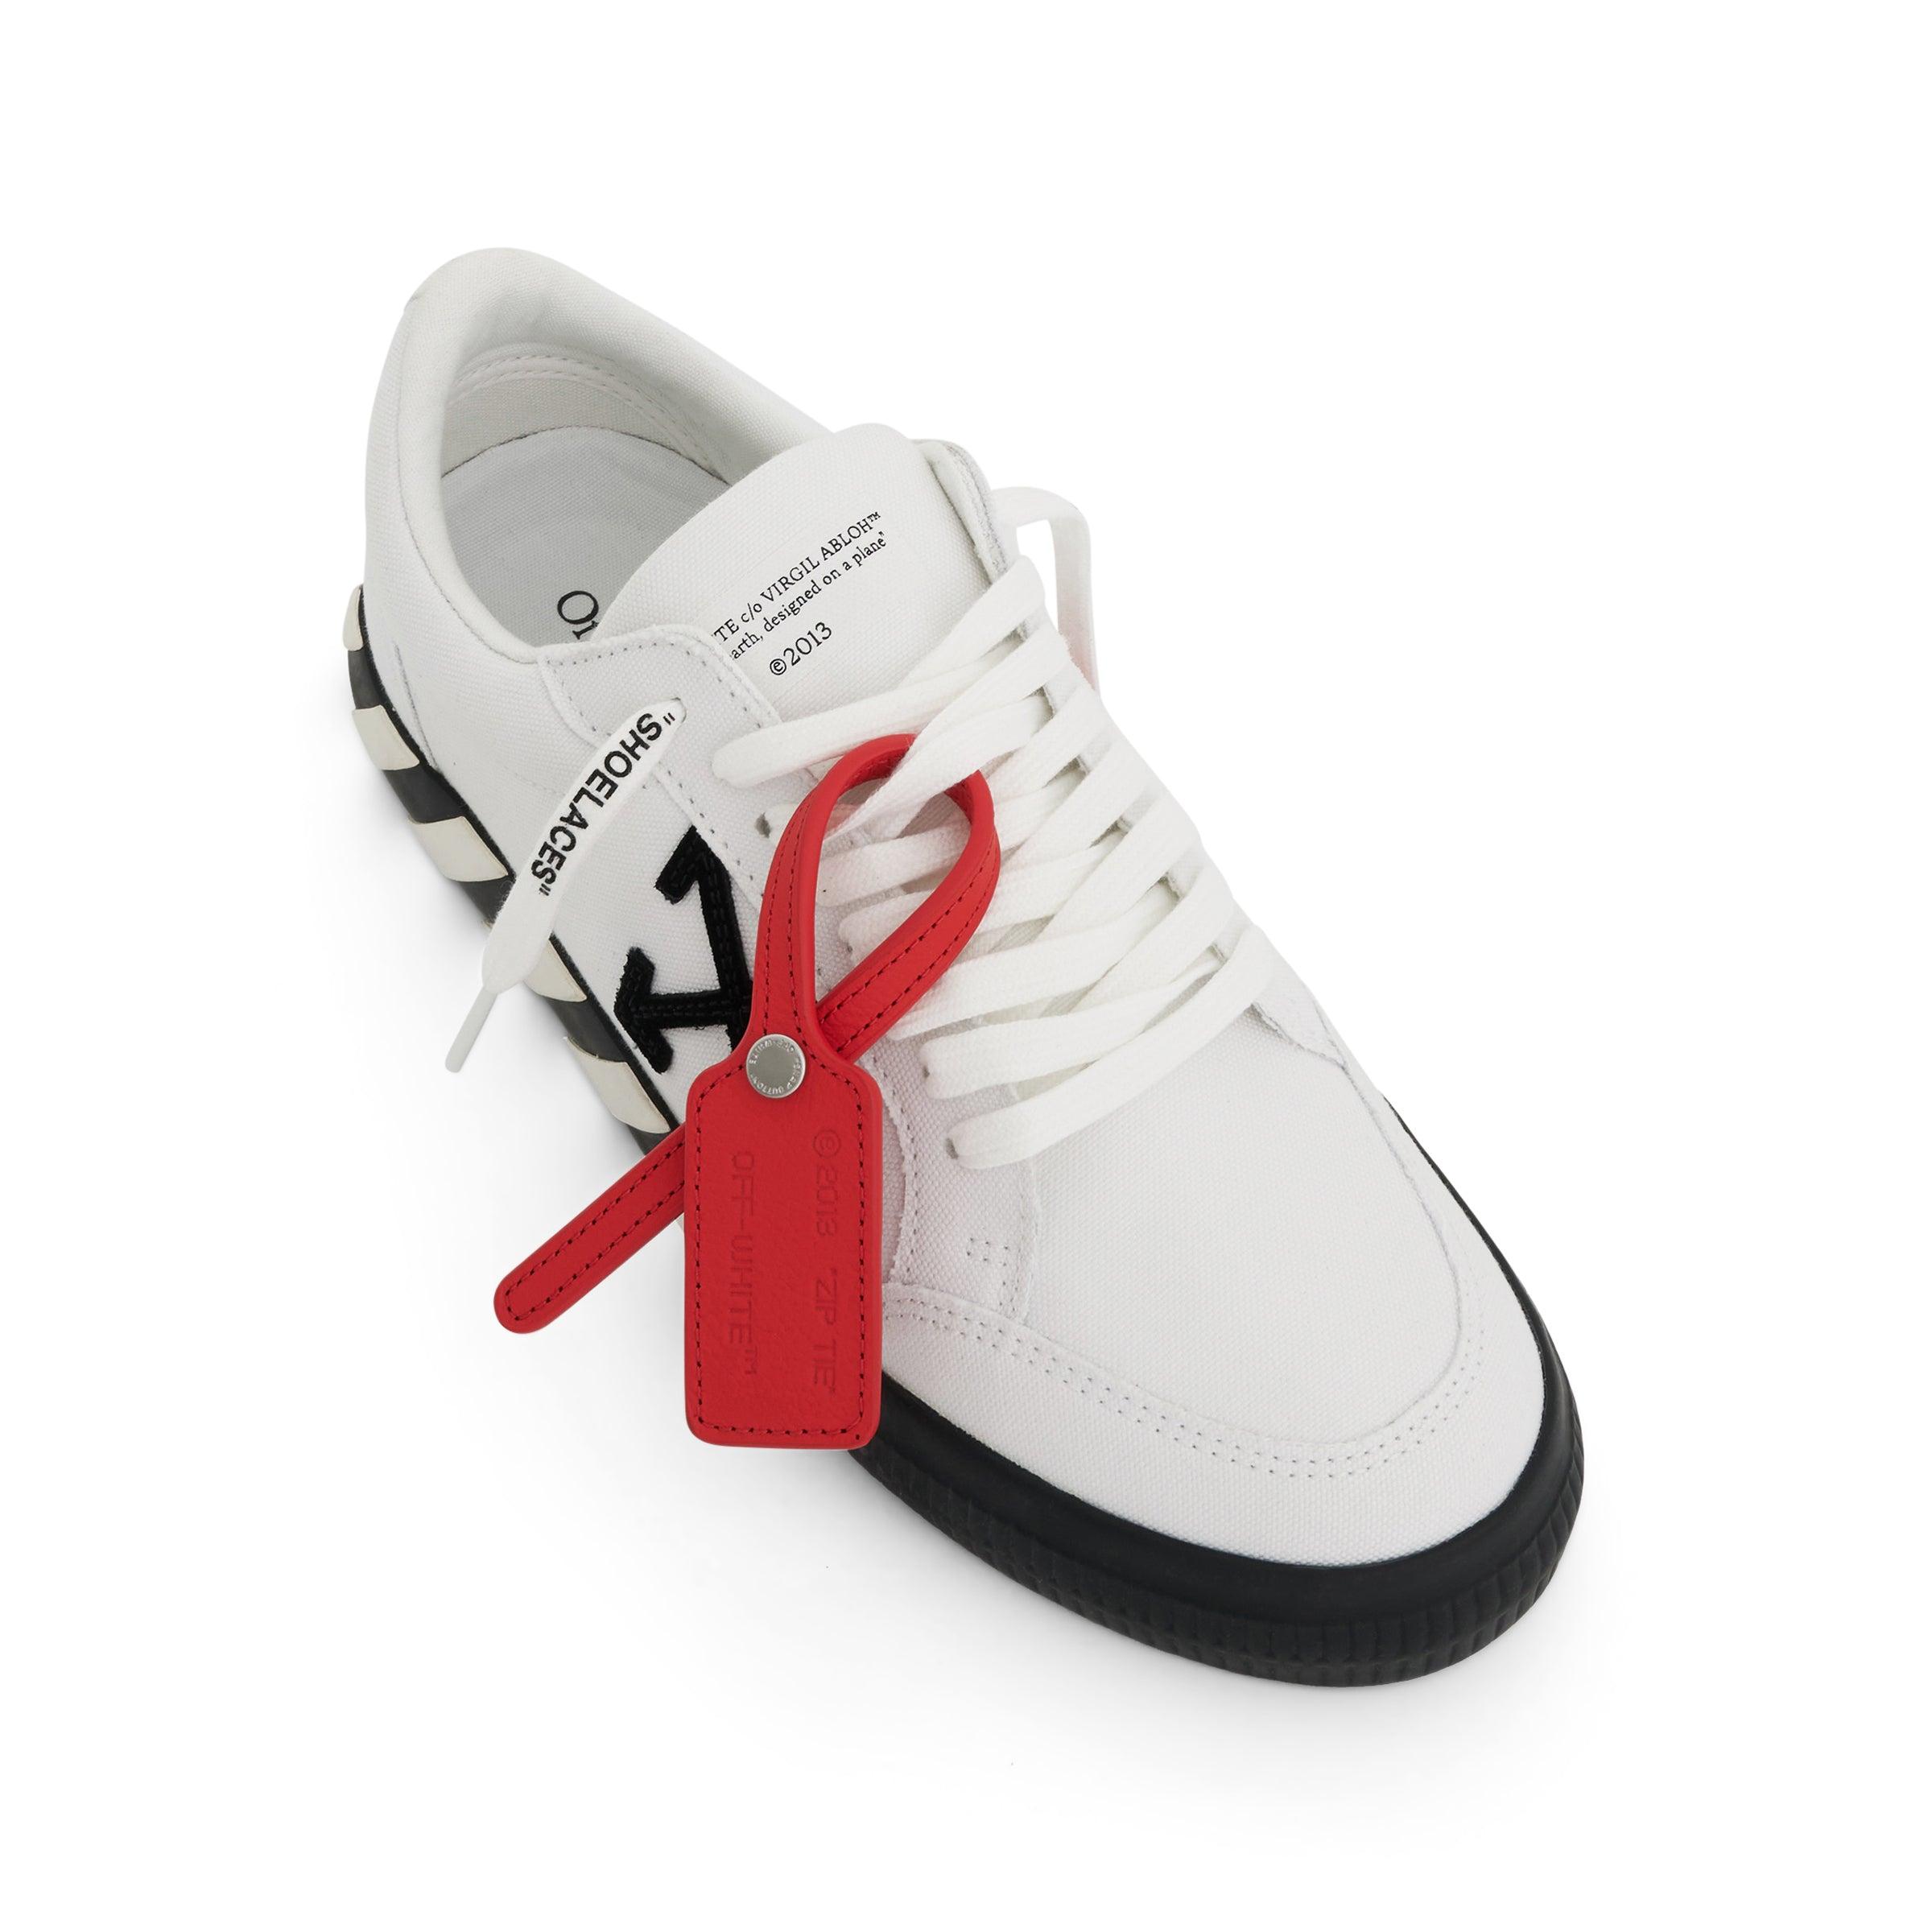 Off-White Vulcanized c/o Virgil Abloh White & Red Low Top Sneakers -  Men's US 10